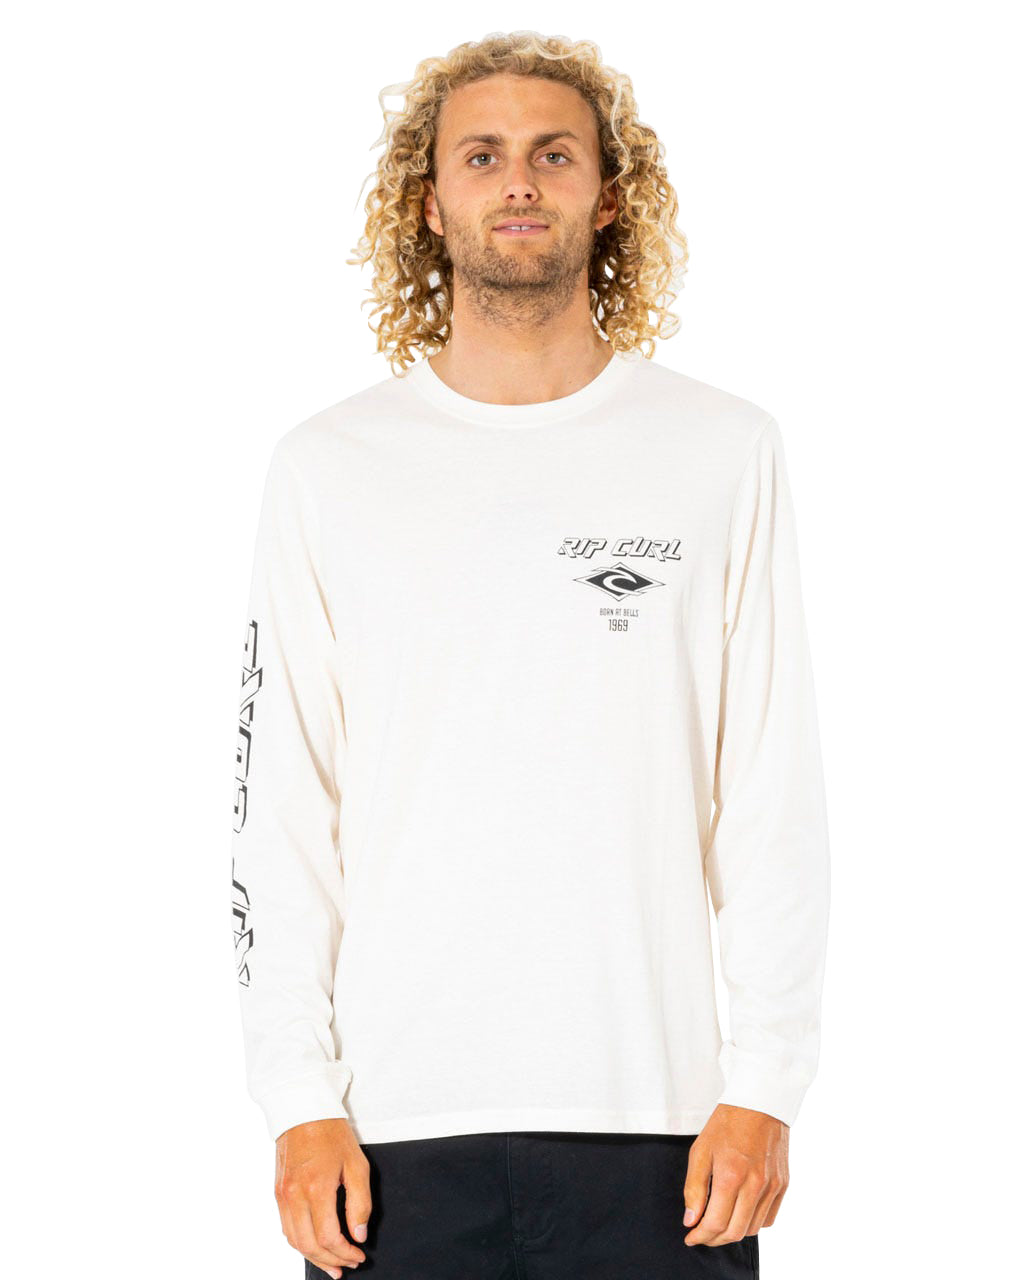 RIP CURL FADE OUT ICON LS TEE Bone L